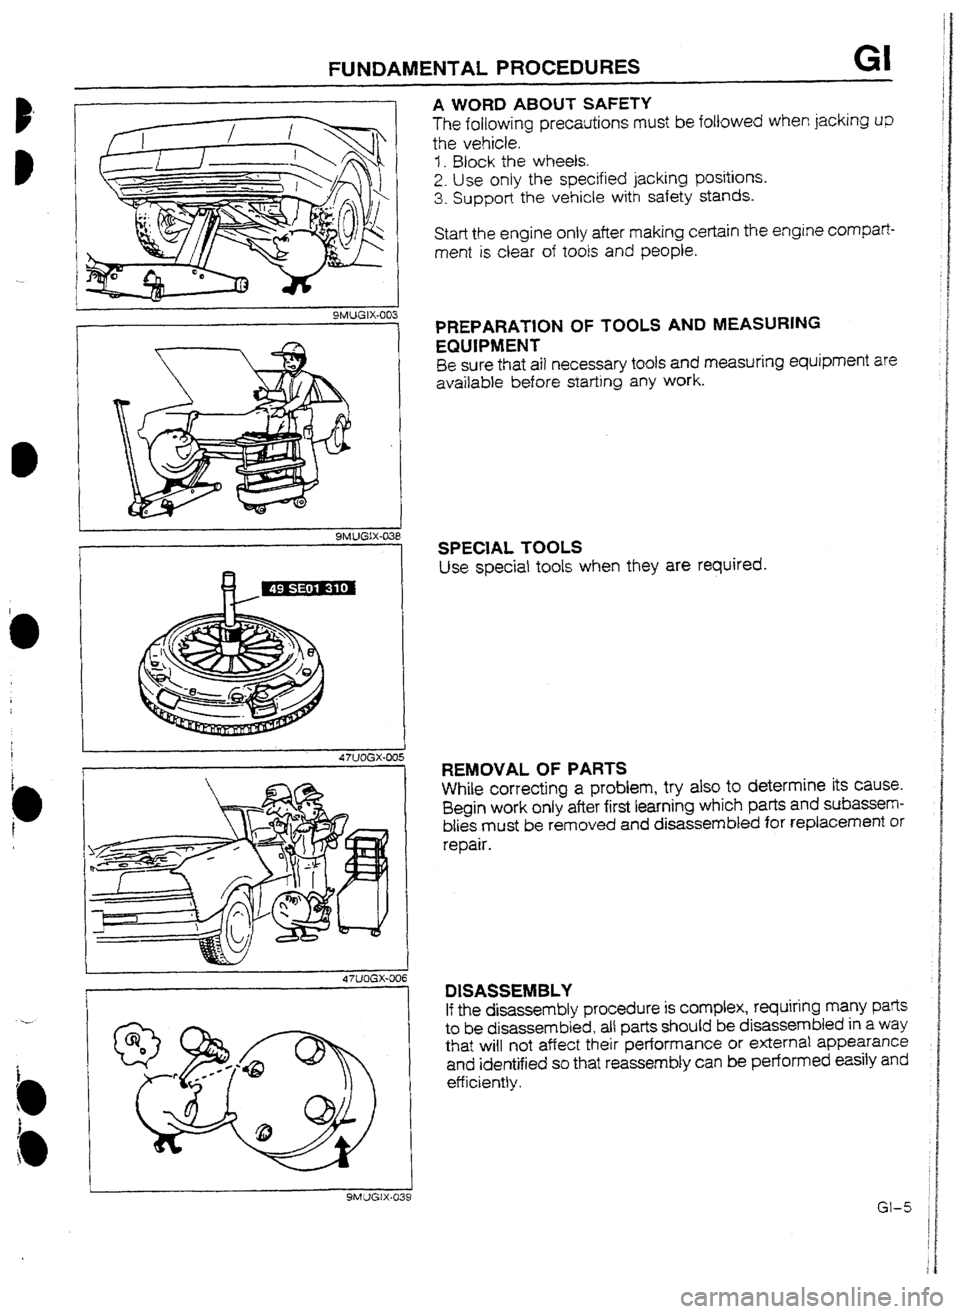 MAZDA 232 1990  Workshop Manual Suplement FUNDAMENTAL PROCEDURES GI 
I 9MUGIX-003 
I 
SMUGIX-038 
A WORD ABOUT SAFETY 
The following precautions must be followed when jacking up 
the vehicle, 
3. Block the wheels. 
2. Use only the specified j